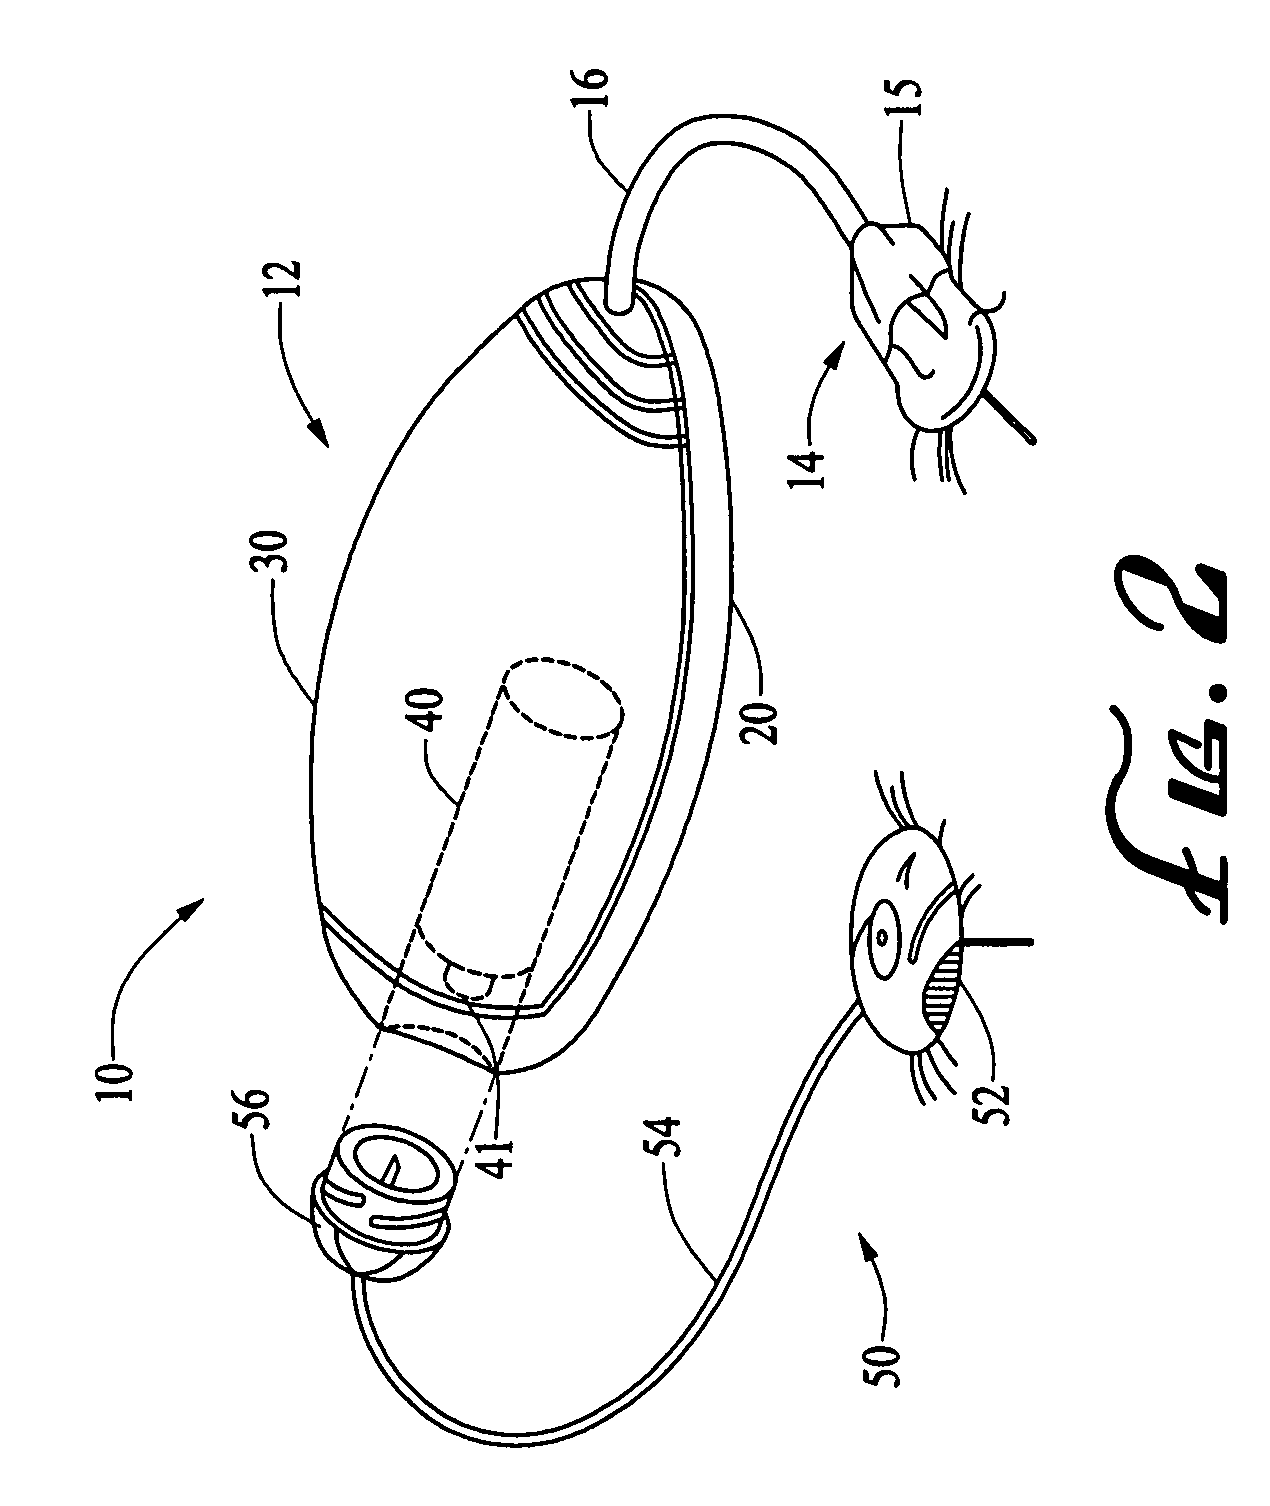 Systems and methods allowing for reservoir filling and infusion medium delivery